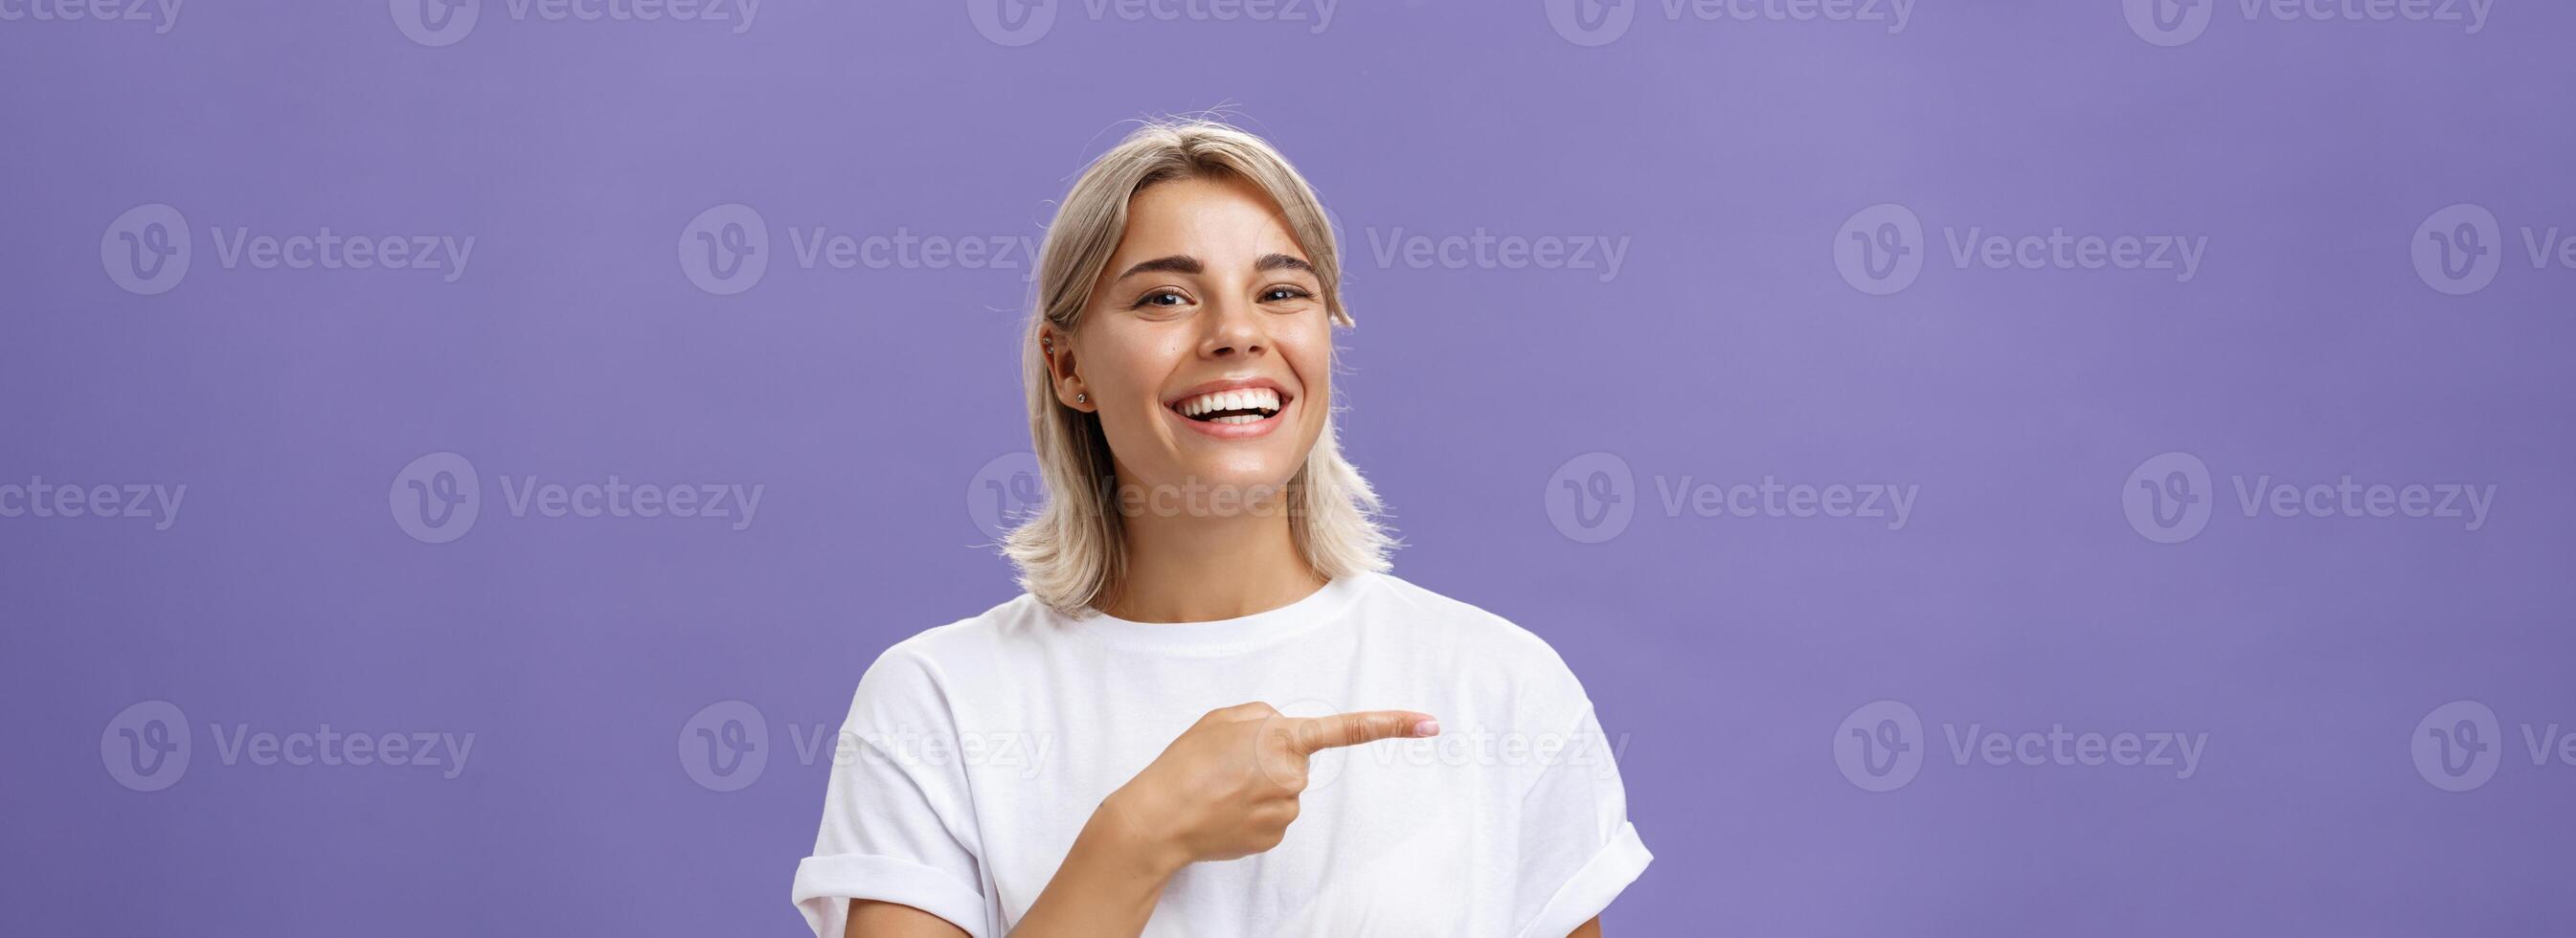 Close-up shot of amused happy and entertained good-looking sociable woman with fair hair and beautiful smile grinning while pointing left with index finger showing awesome copy space over purple wall photo